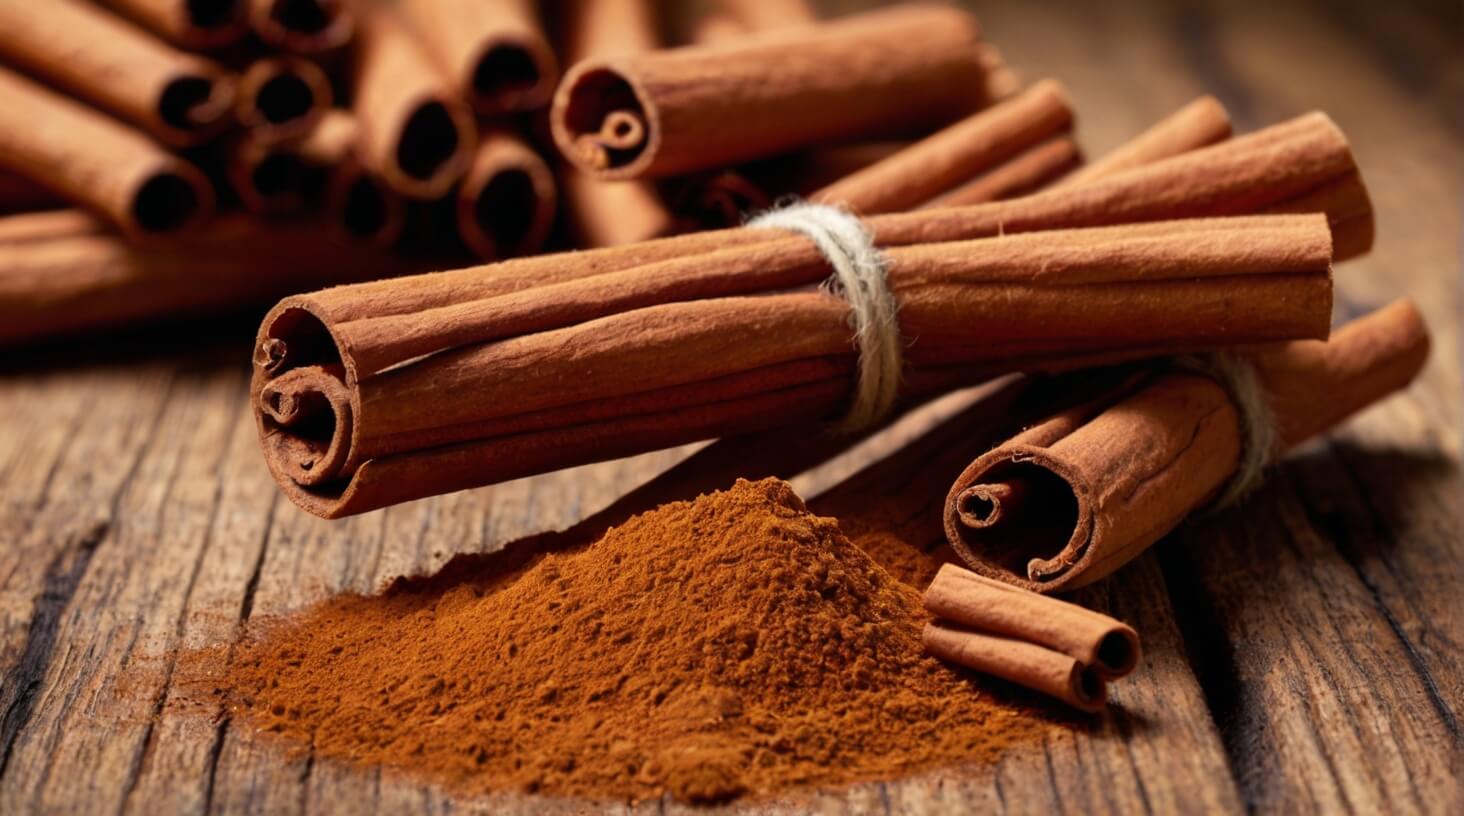 A pile of cinnamon sticks and a jar of cinnamon powder, showcasing the benefits of cinnamon supplements for health and wellness.